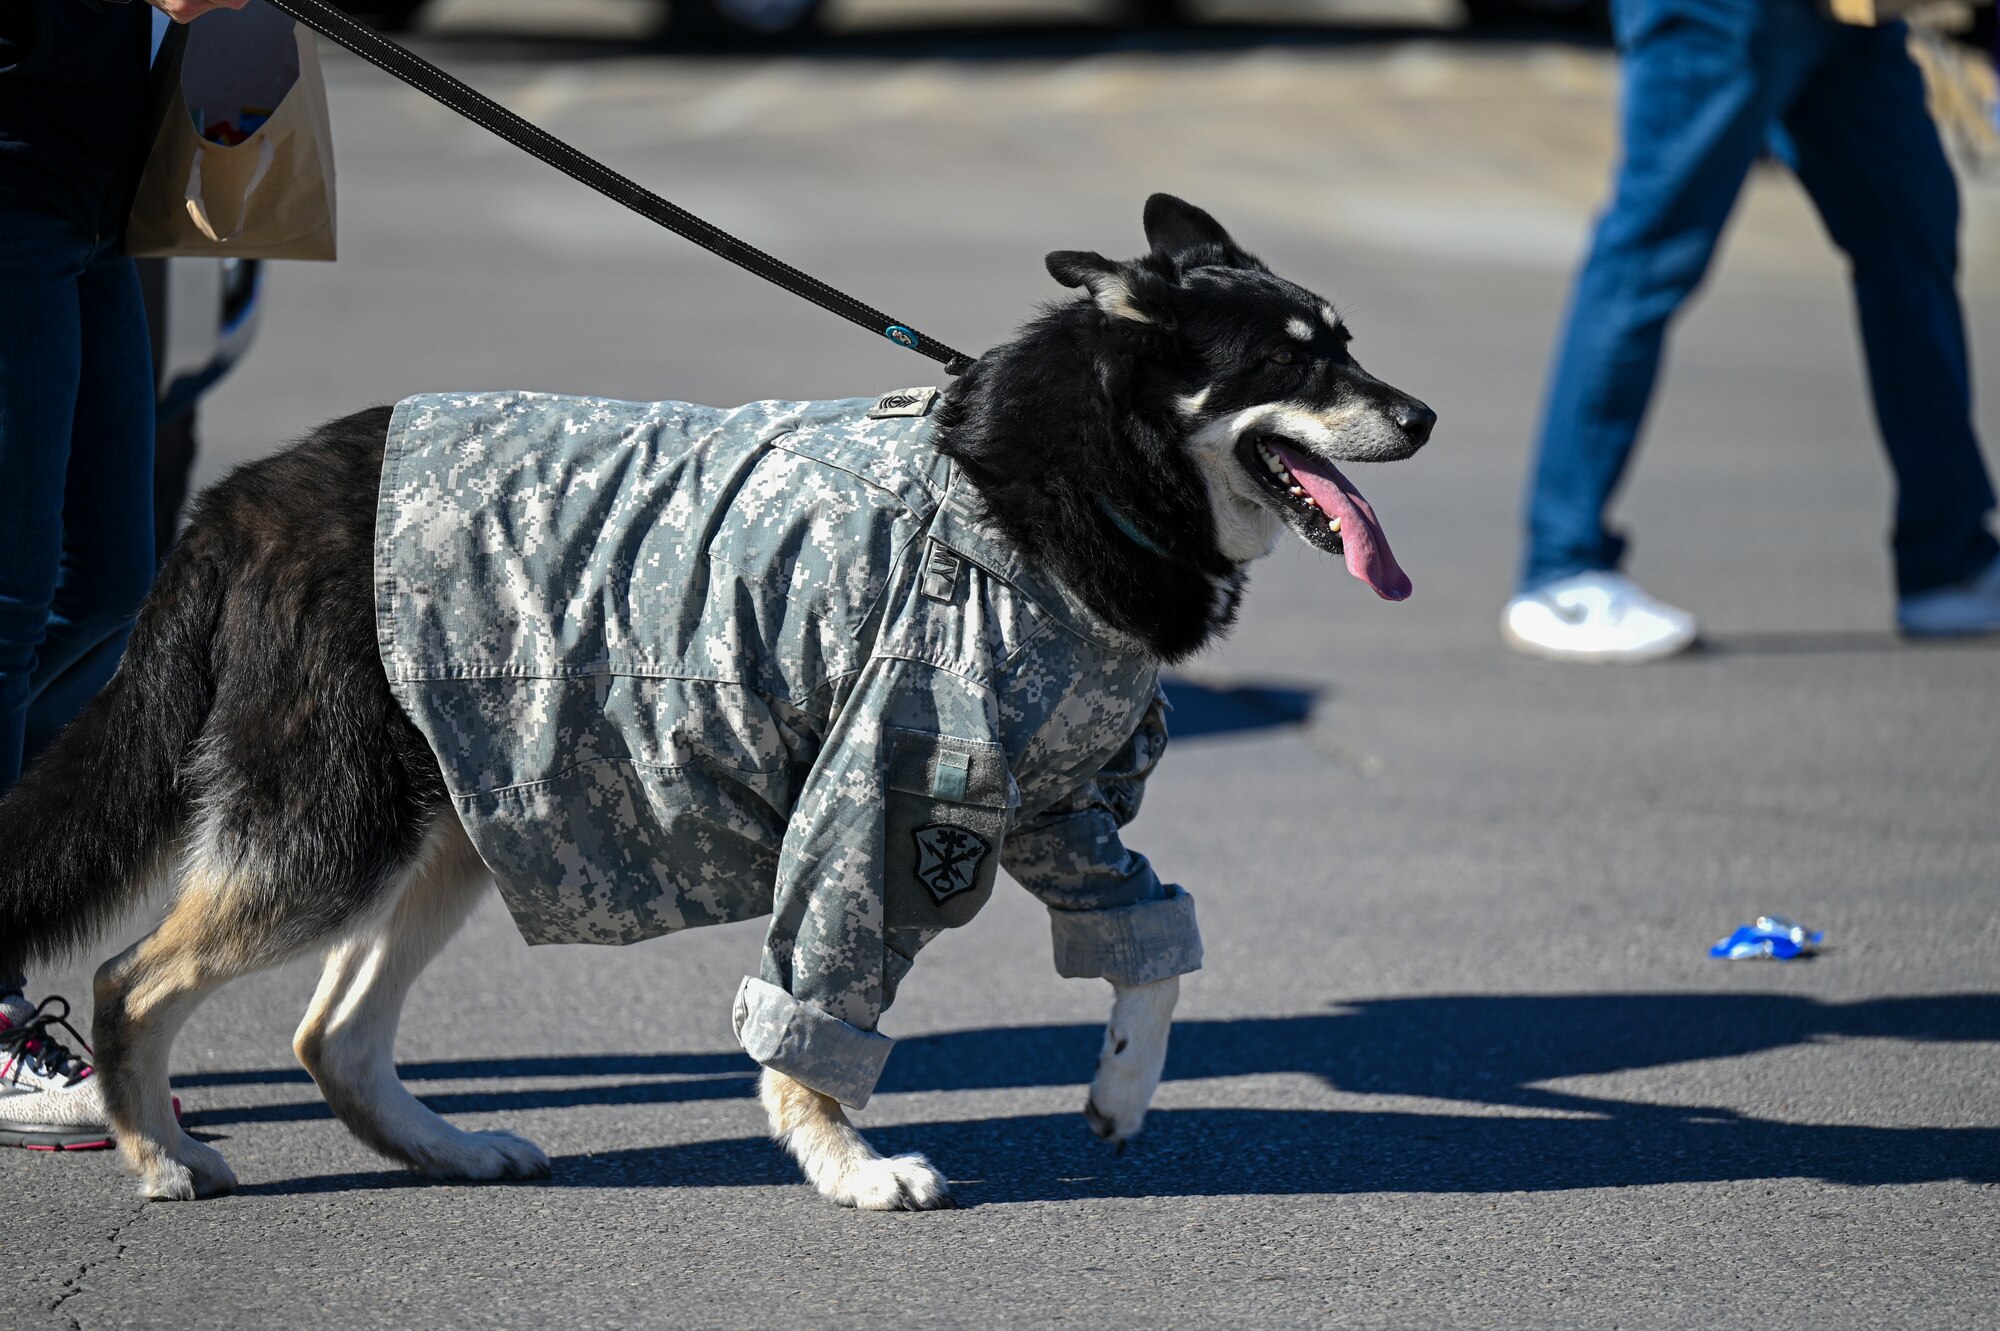 A dog wearing an old U.S. Army Combat Uniform marches during the San Angelo All Veterans Council Veterans Day parade downtown, San Angelo, Texas, Nov. 5, 2022. The Parade featured service members from each branch as well as veterans from across the San Angelo community. (U.S. Air Force photo by Senior Airman Michael Bowman)